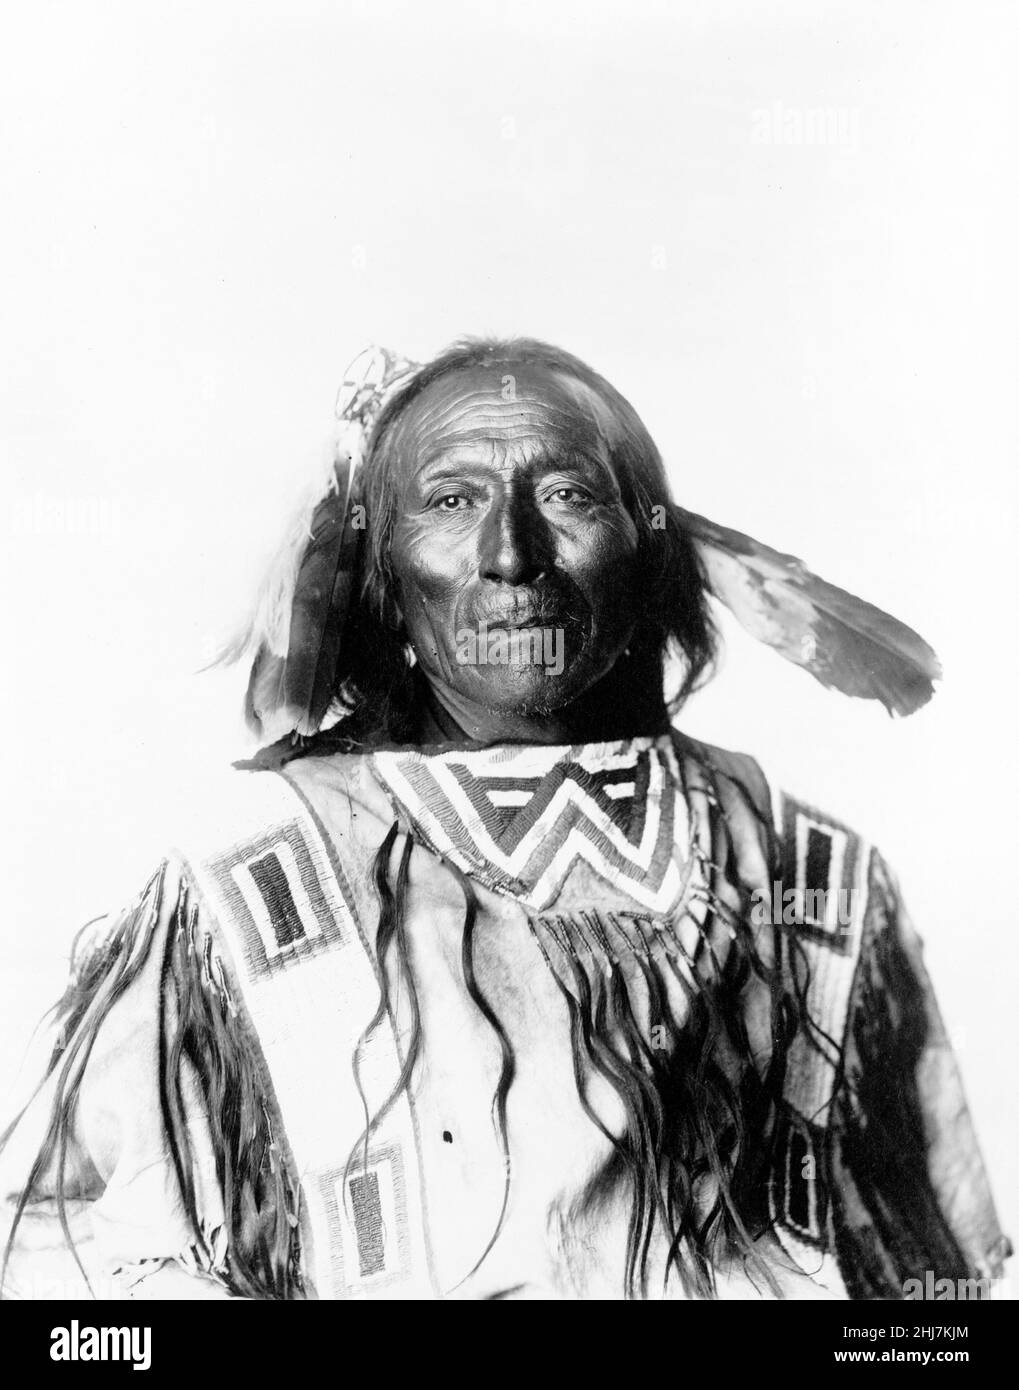 Chief Revenger portrait. Antique and vintage photo - Native american / Indian / American Indian. Photo by Heyn and Matzen c 1900. Stock Photo